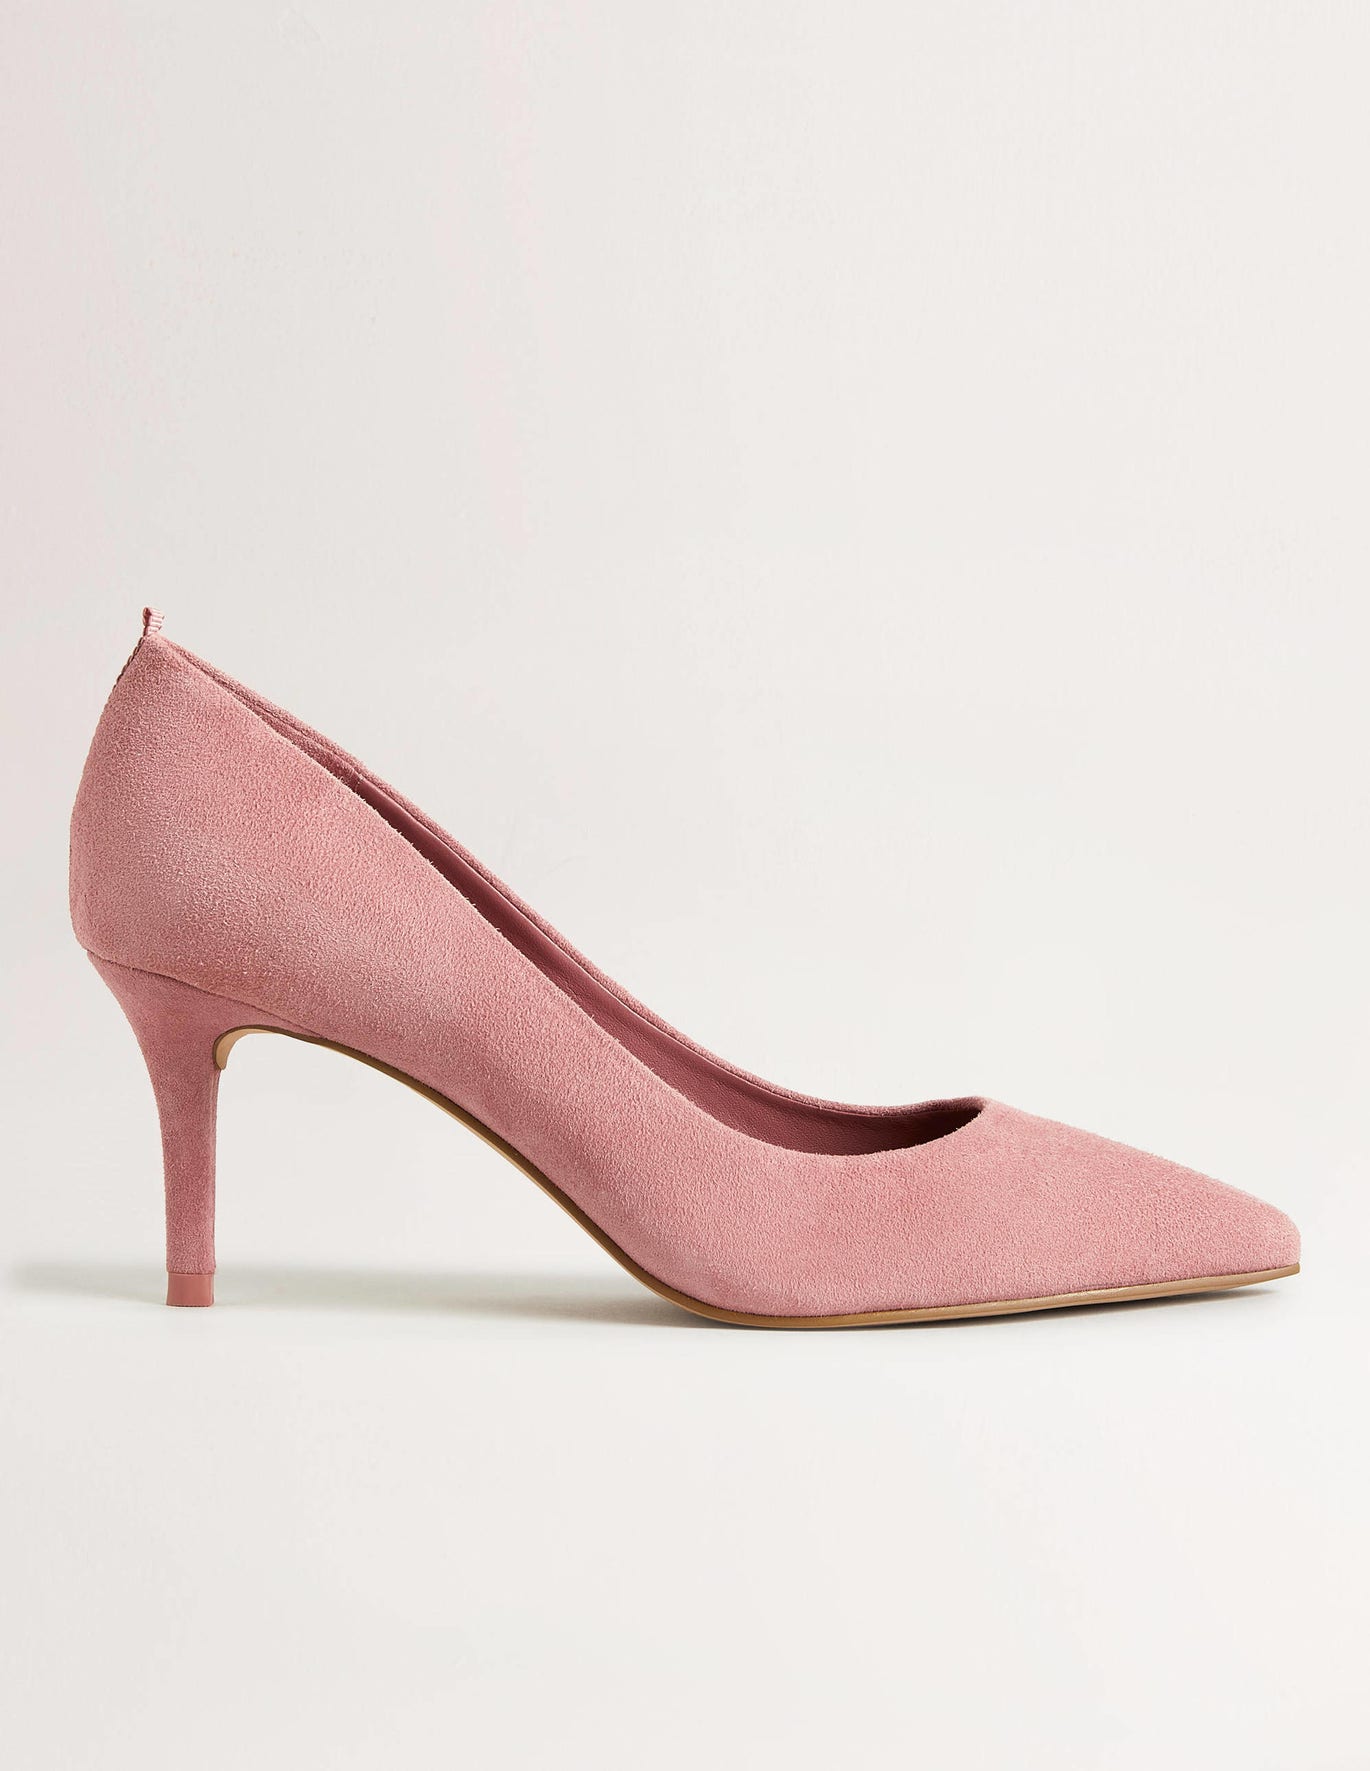 Boden Classic Suede Heels - Dusty Red